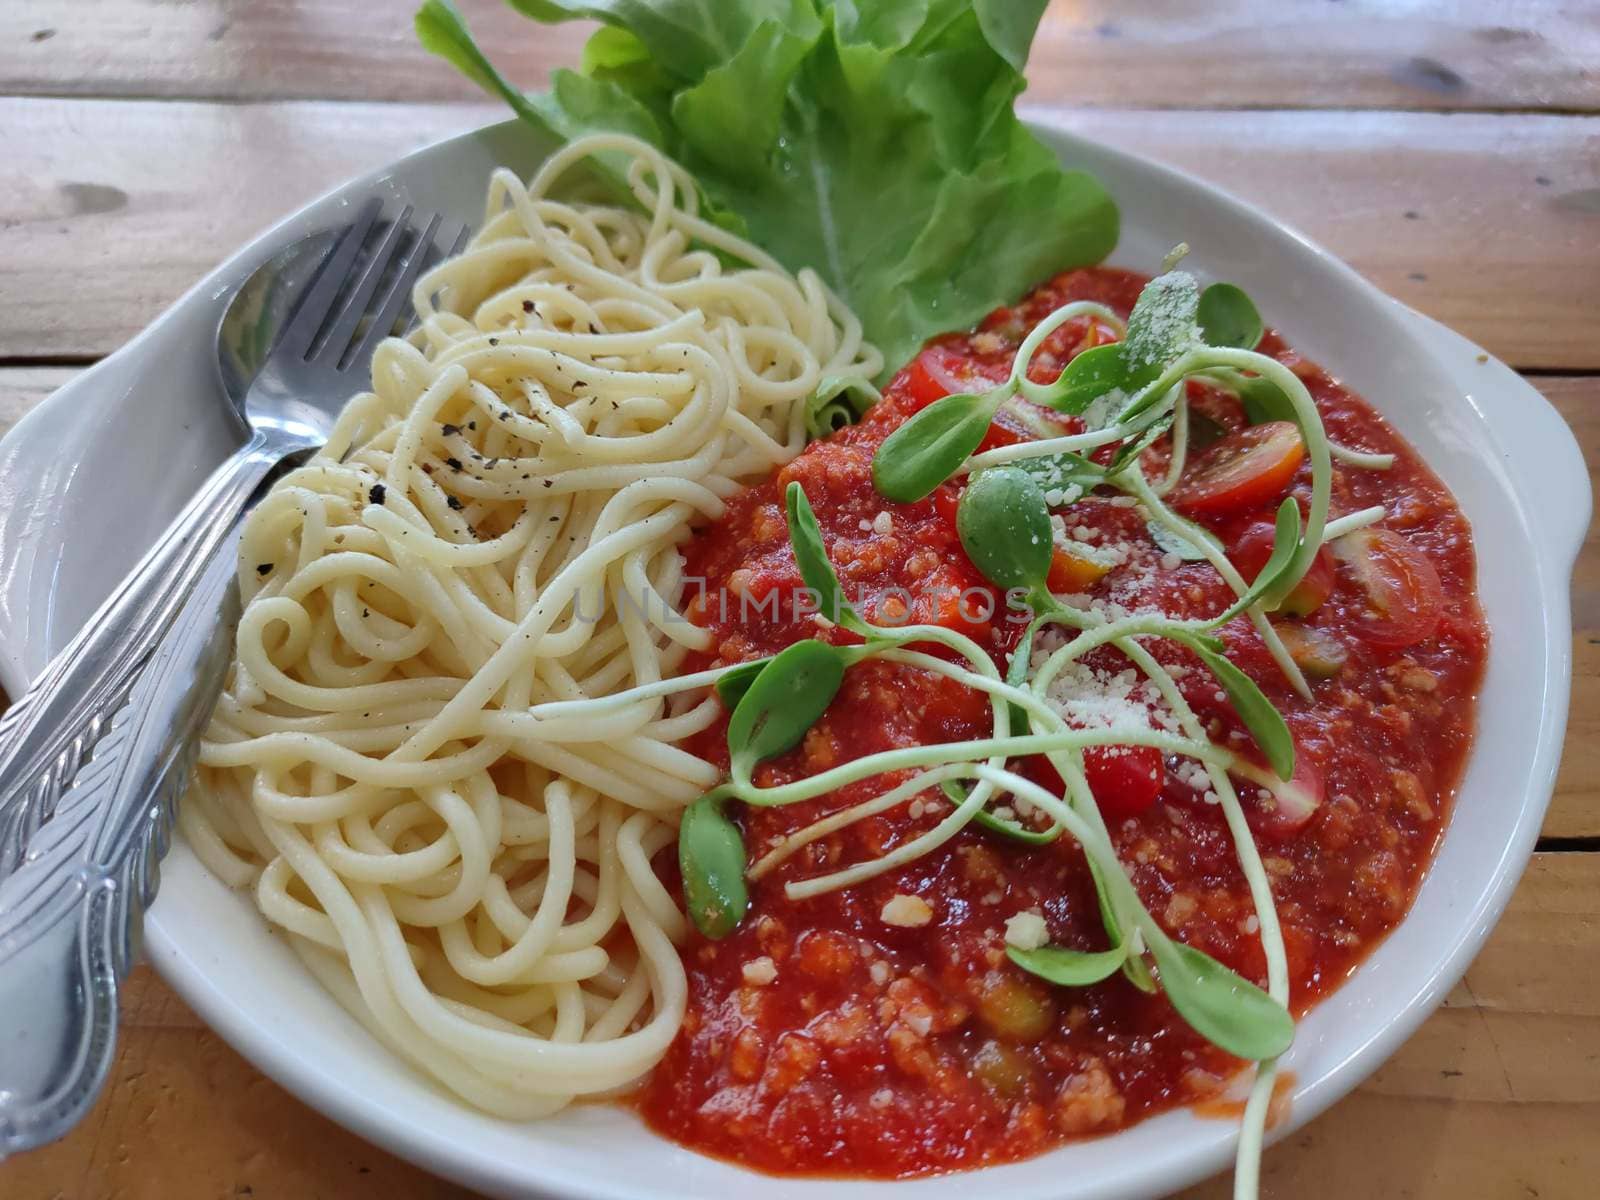 Tasty appetizing classic italian spaghetti pasta with tomato sauce, cheese parmesan and basil on plate by peerapixs